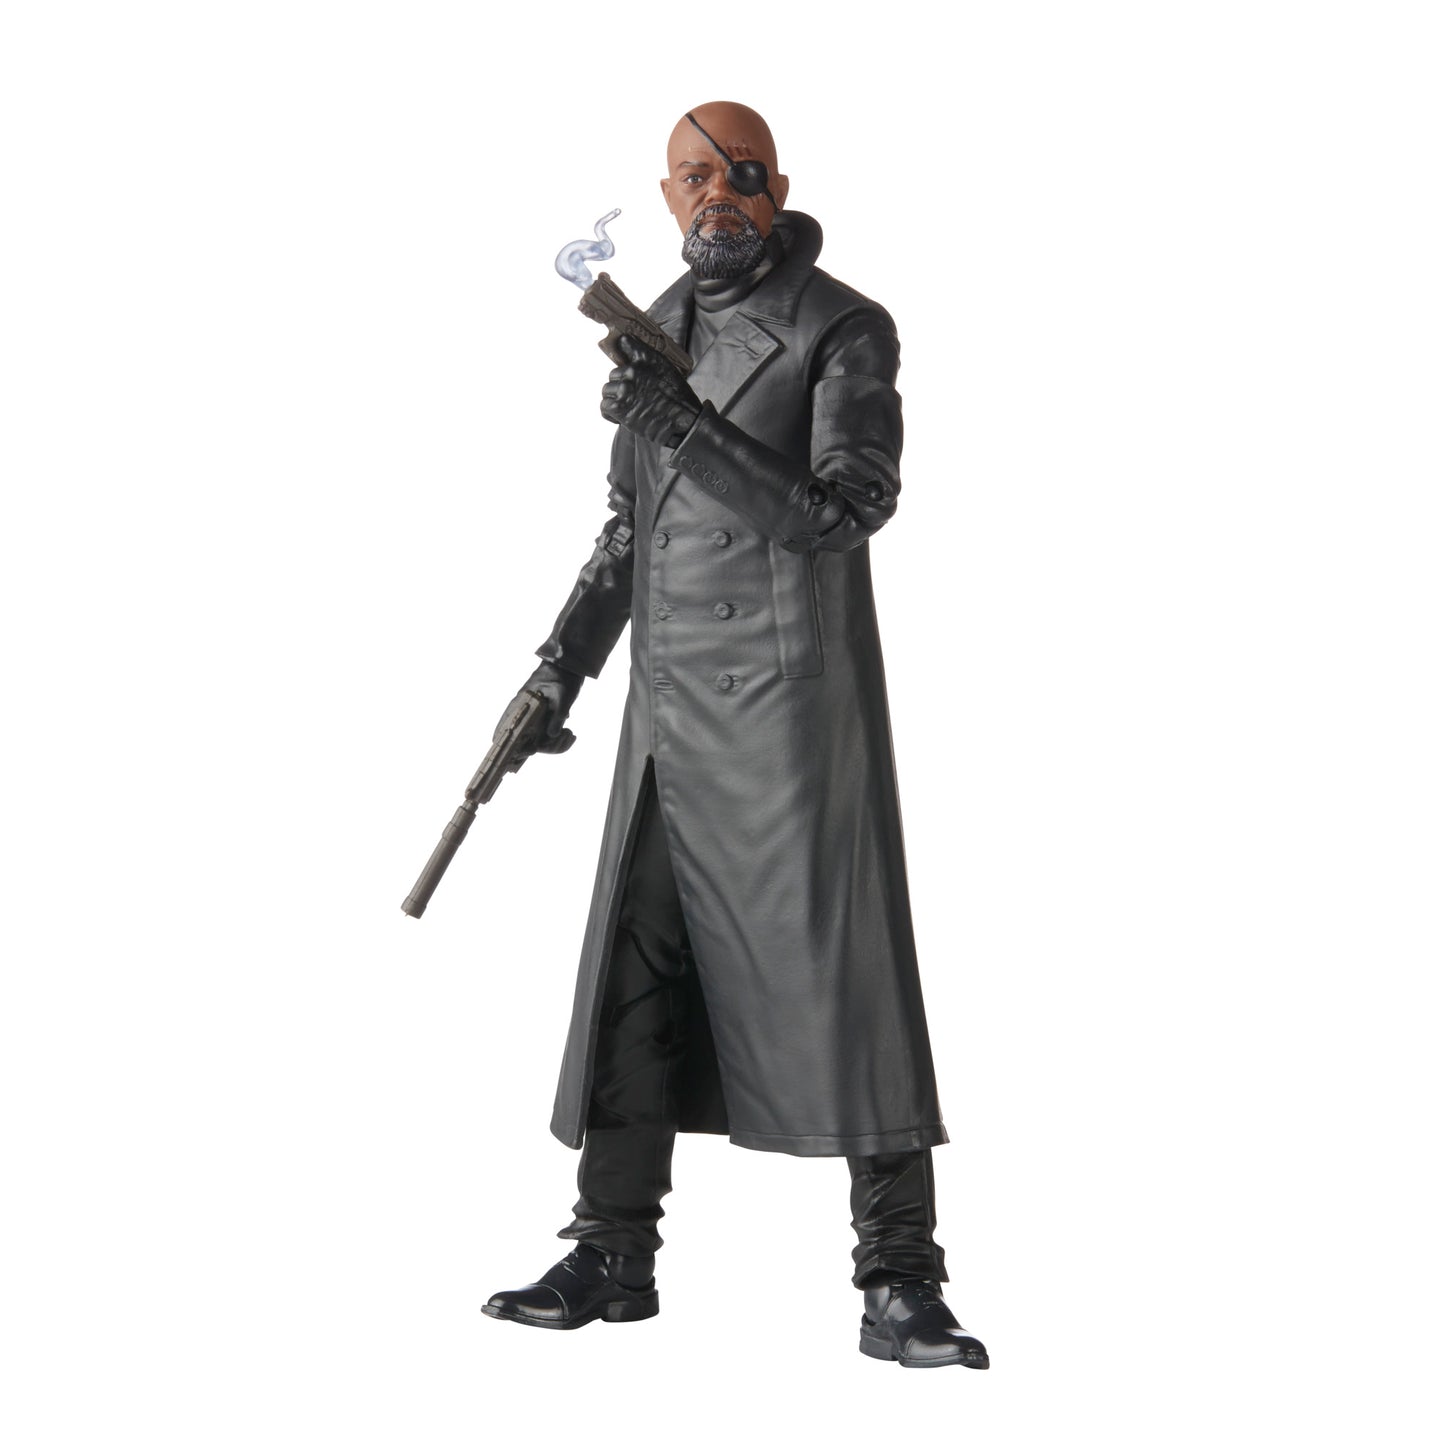 Marvel Legends Series Nick Fury Action Figure 6-Inch Toy posed - heretoserveyou